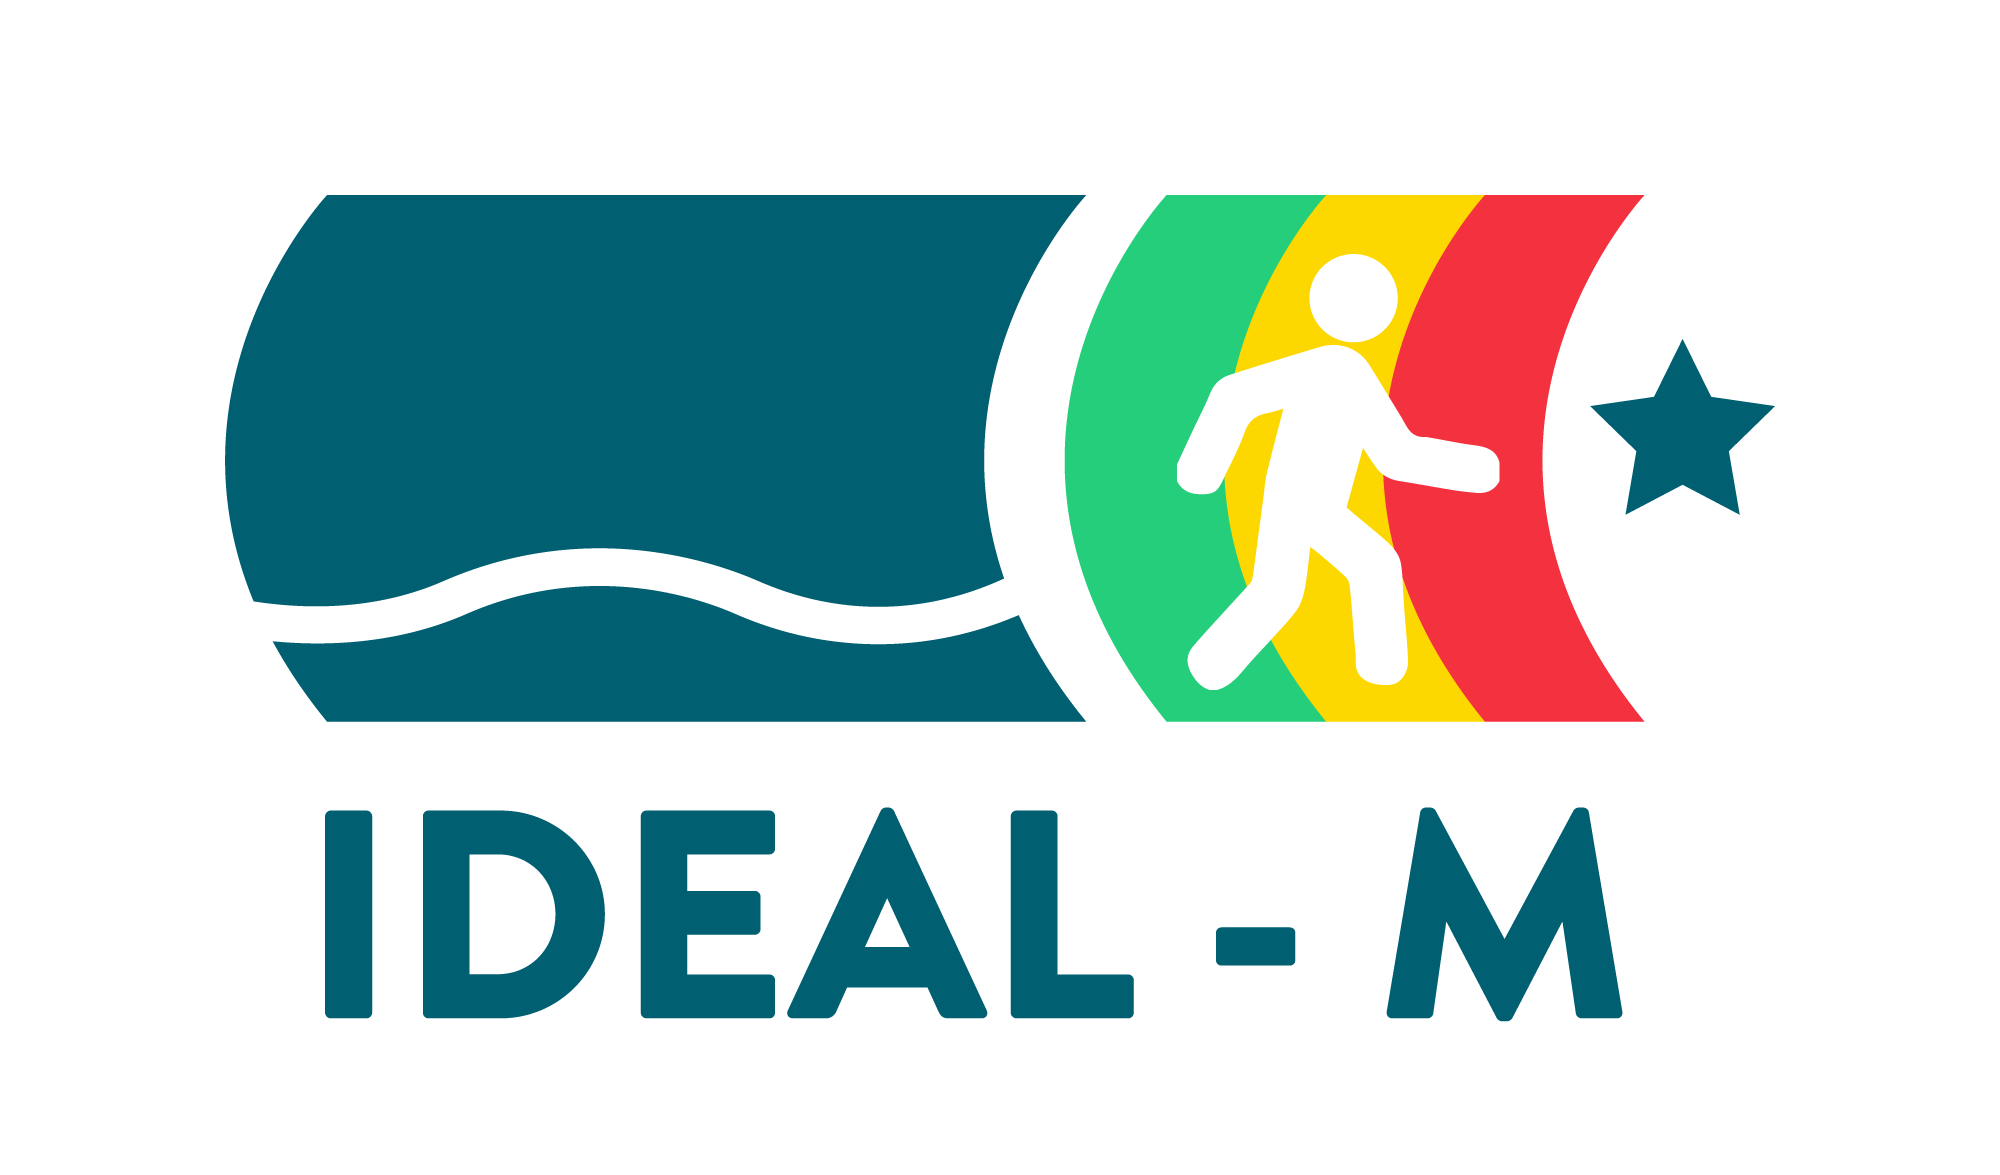 Participation in the IDEAL-M programme